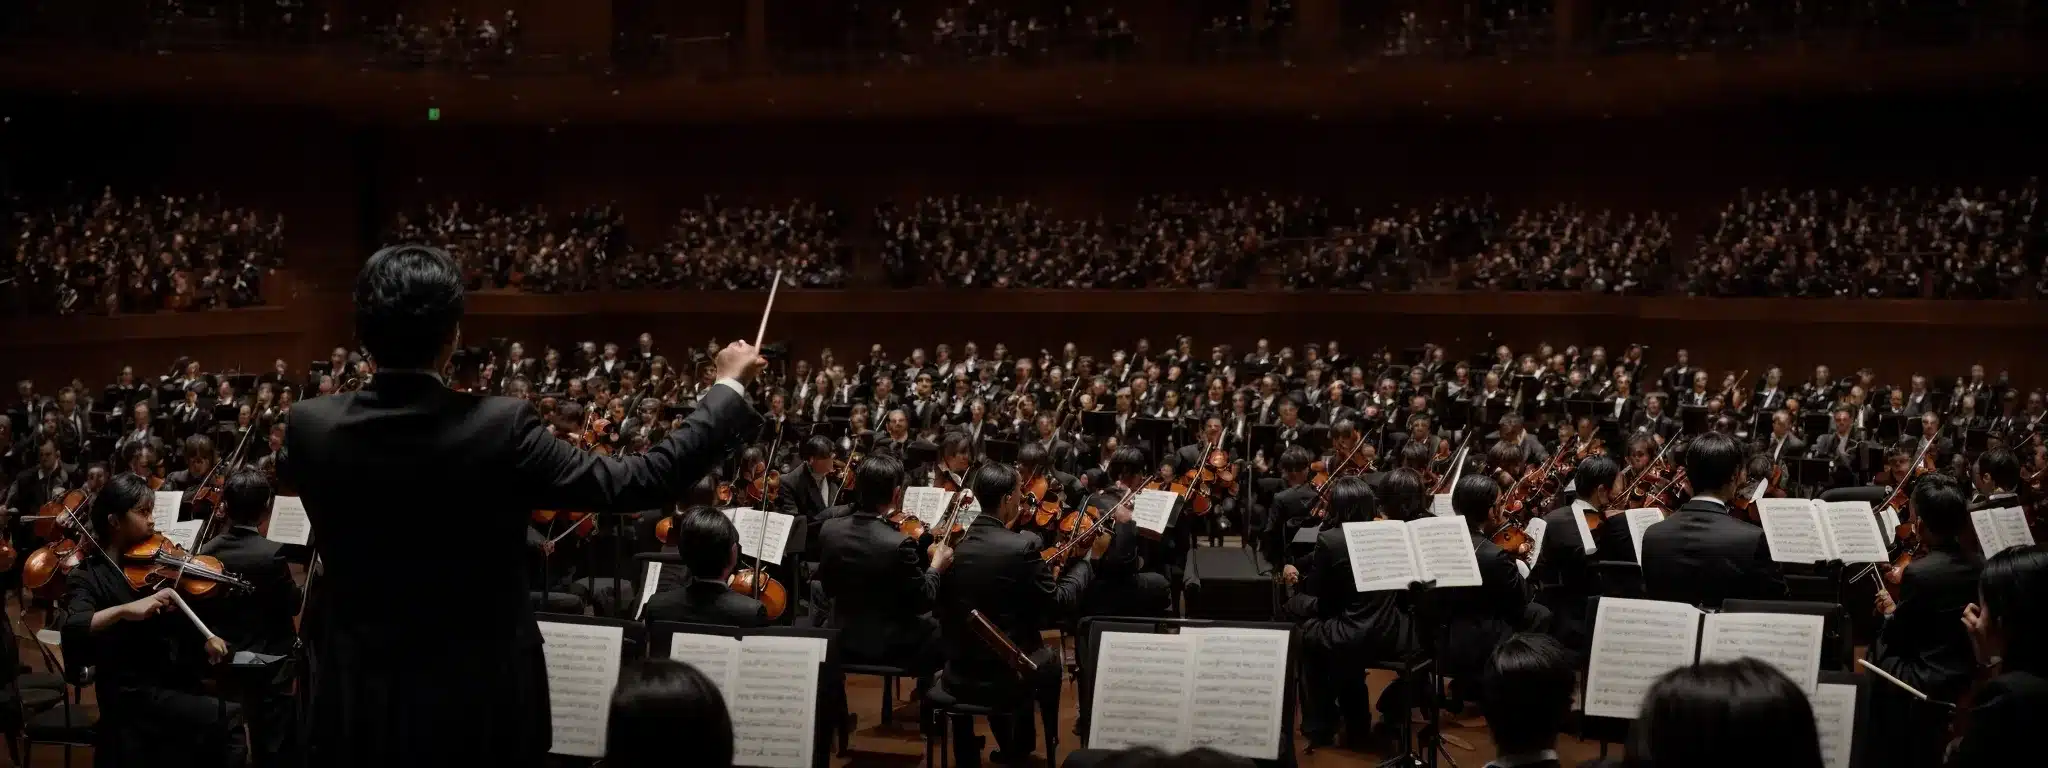 A Conductor Stands Before An Attentive Orchestra, Baton Raised, Poised To Guide The Symphony Of Instruments.